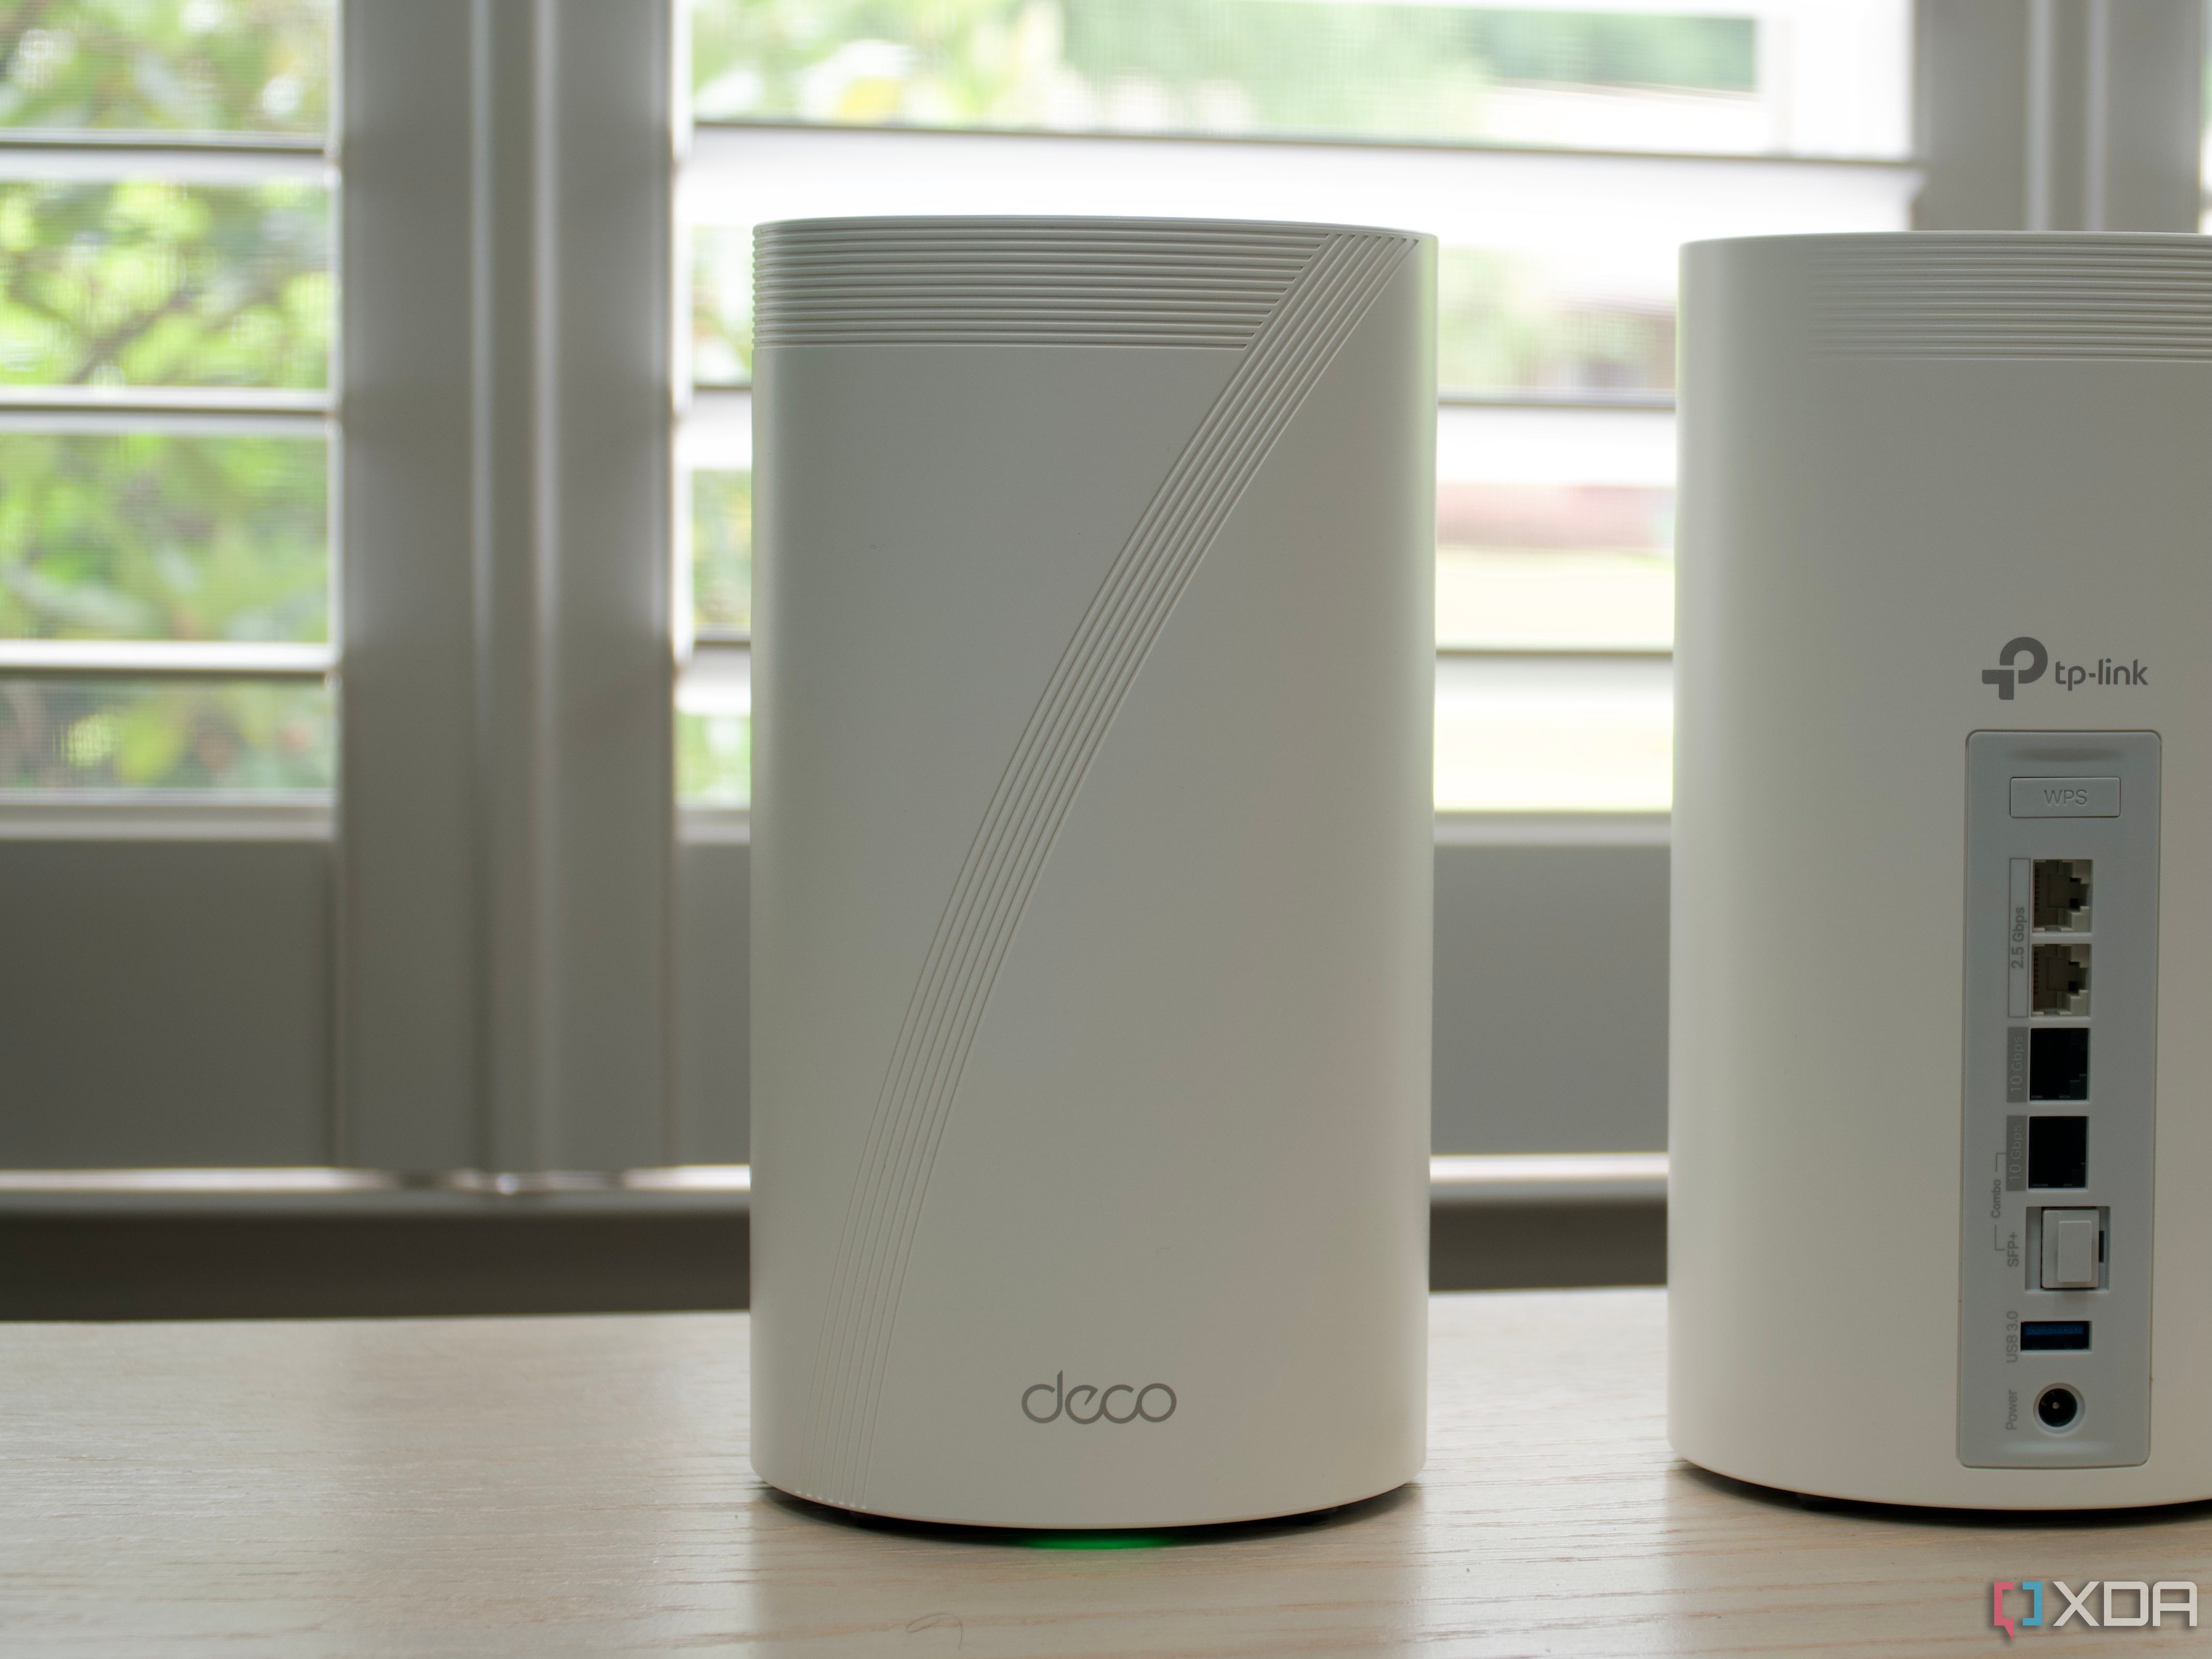 TP-link Deco BE85 Review: The First Wi-Fi 7 Mesh System! - Tech Advisor